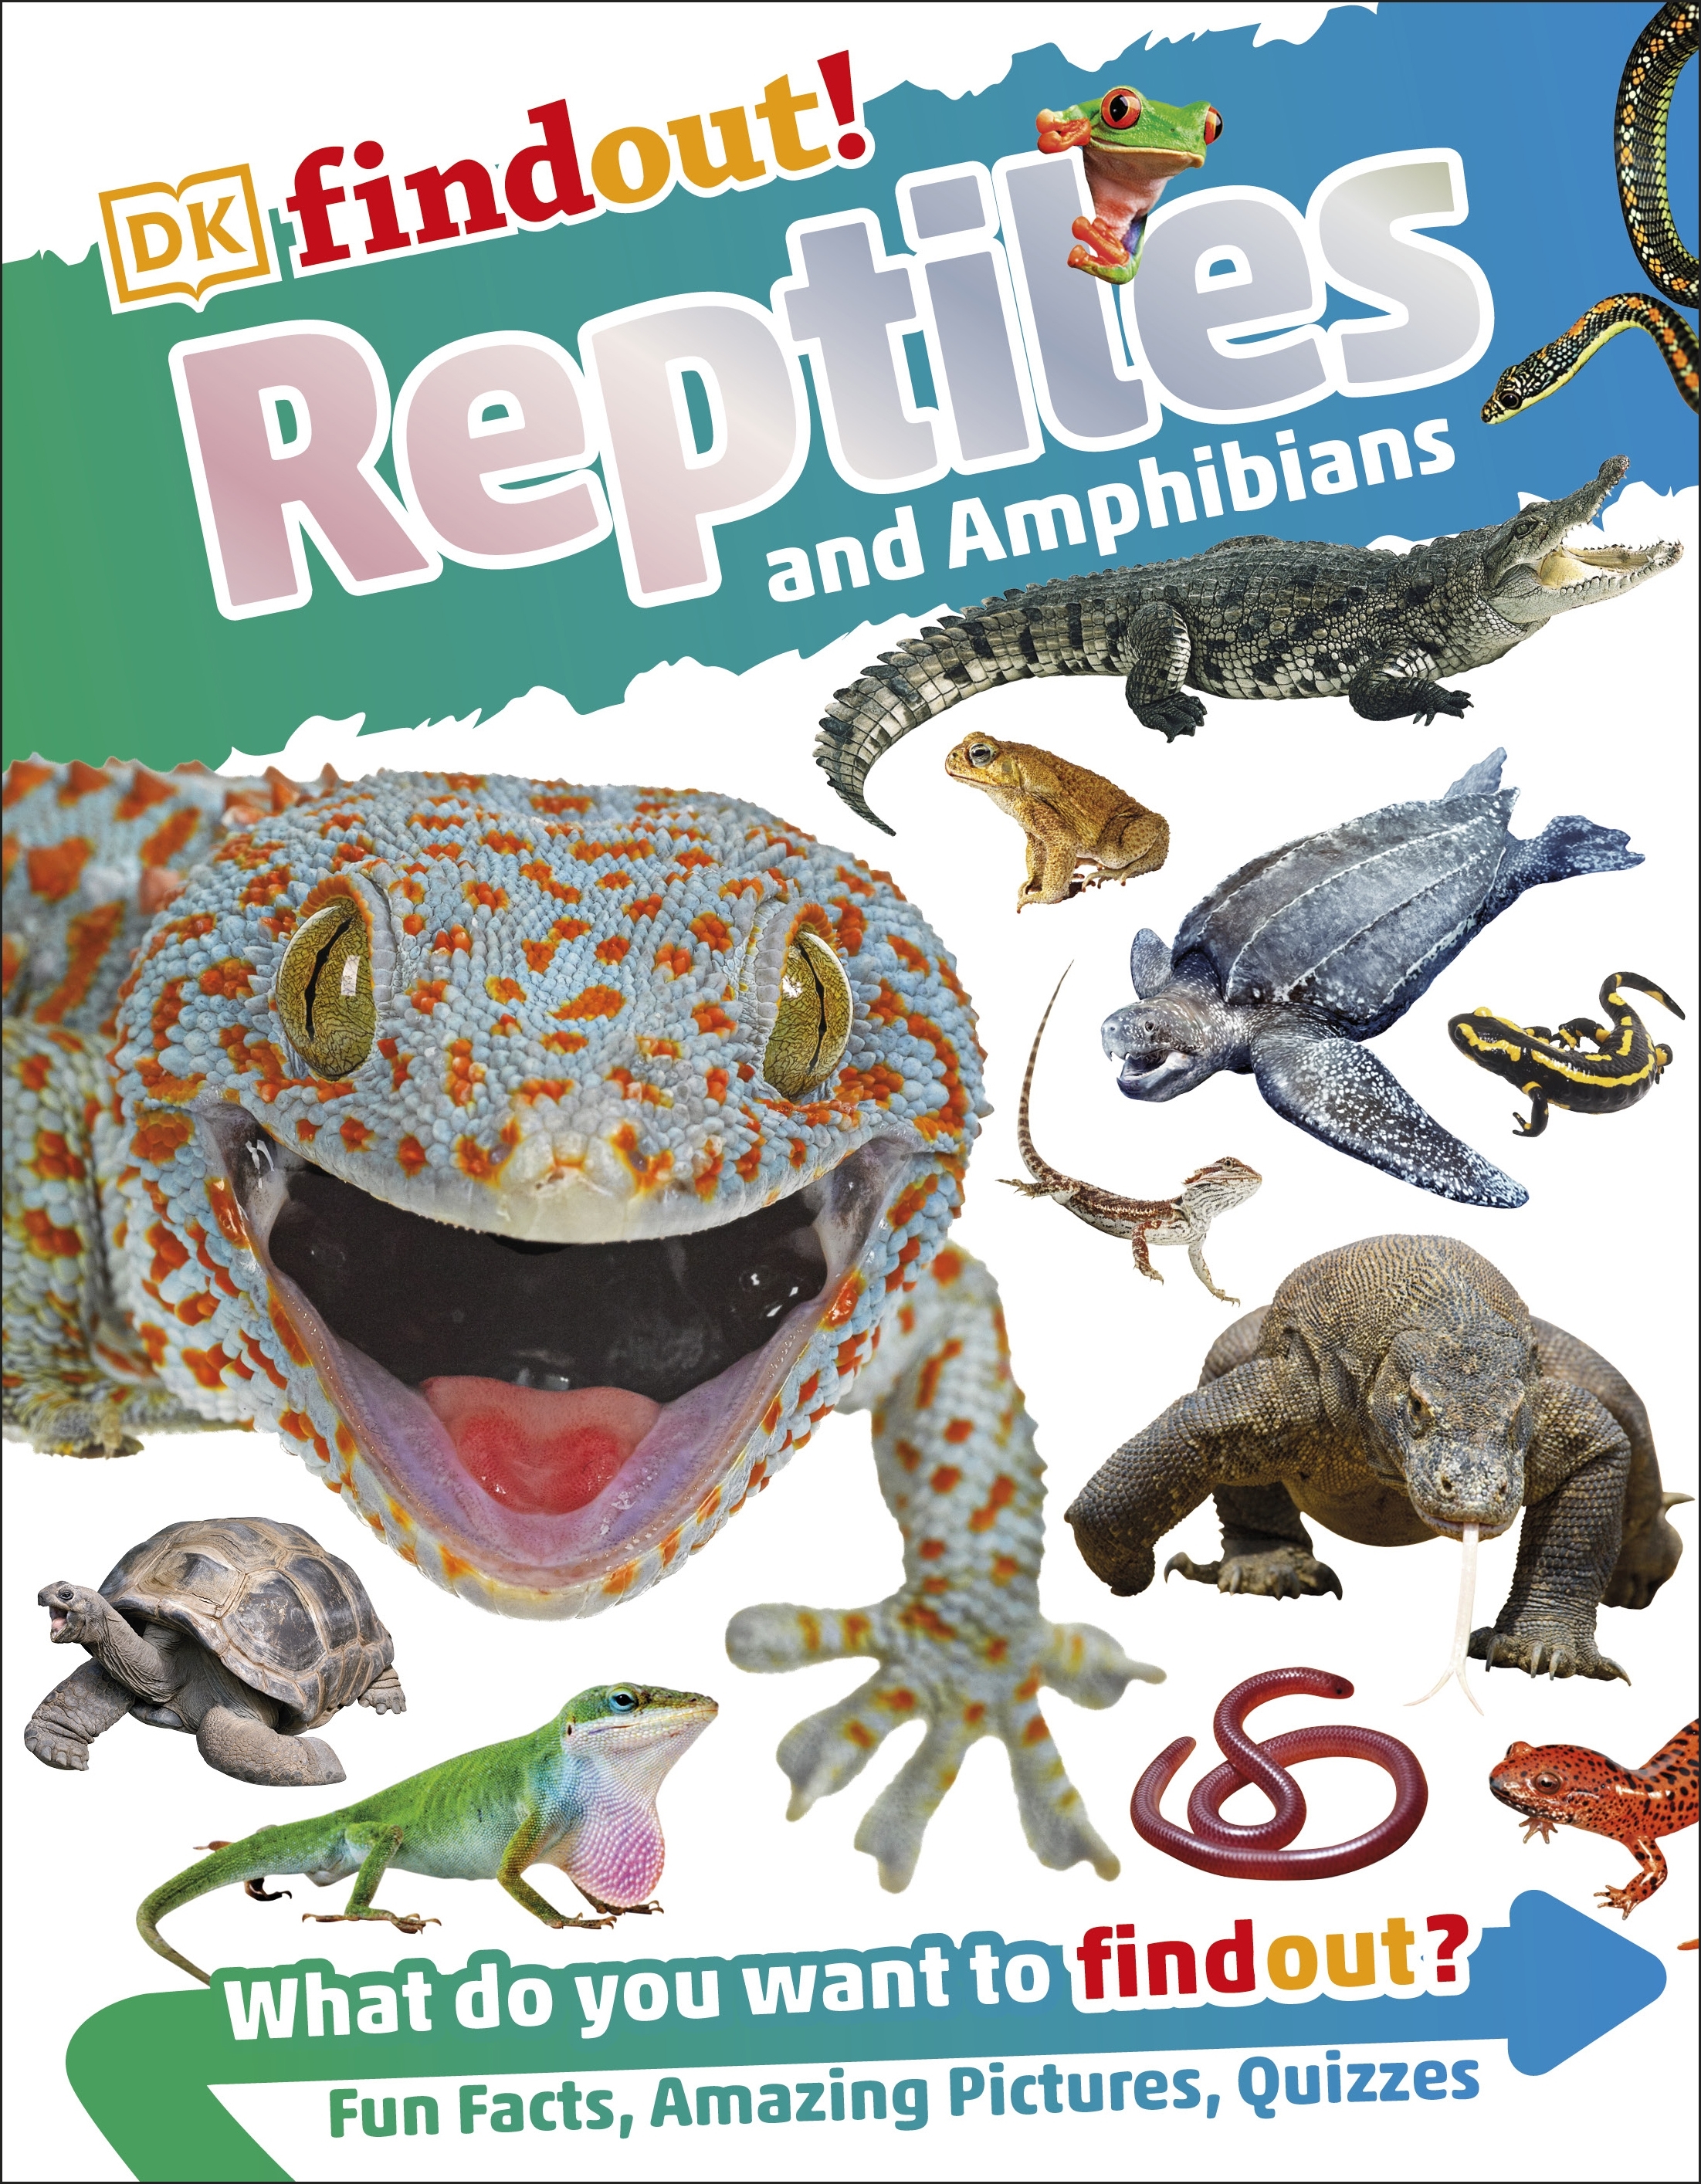 DKfindout! Reptiles and Amphibians by DK - Penguin Books New Zealand